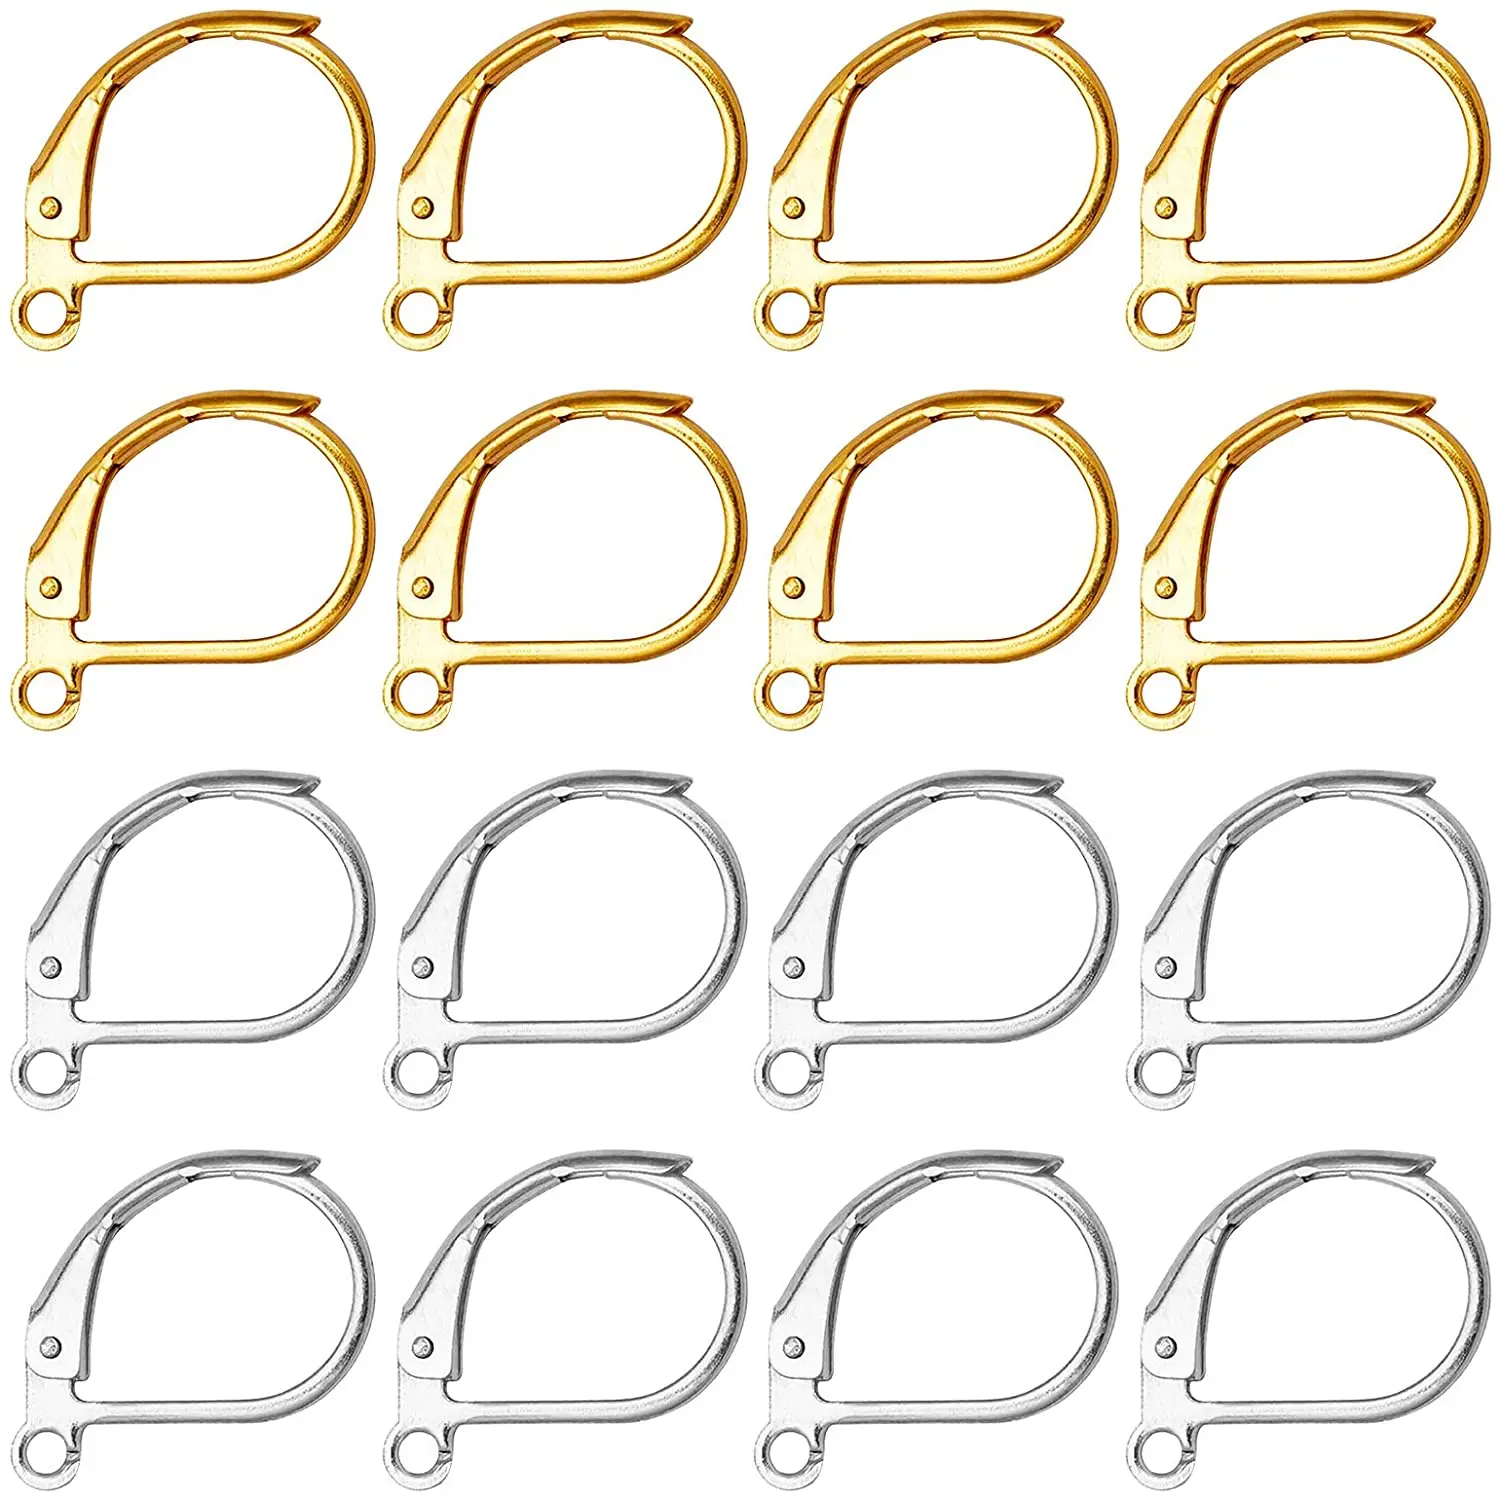 20pcs/lot 15*10mm Gold Silver Color French Lever Earring Hooks Wire Settings Base Hoops Earrings For DIY Jewelry Making Supplies | Украшения